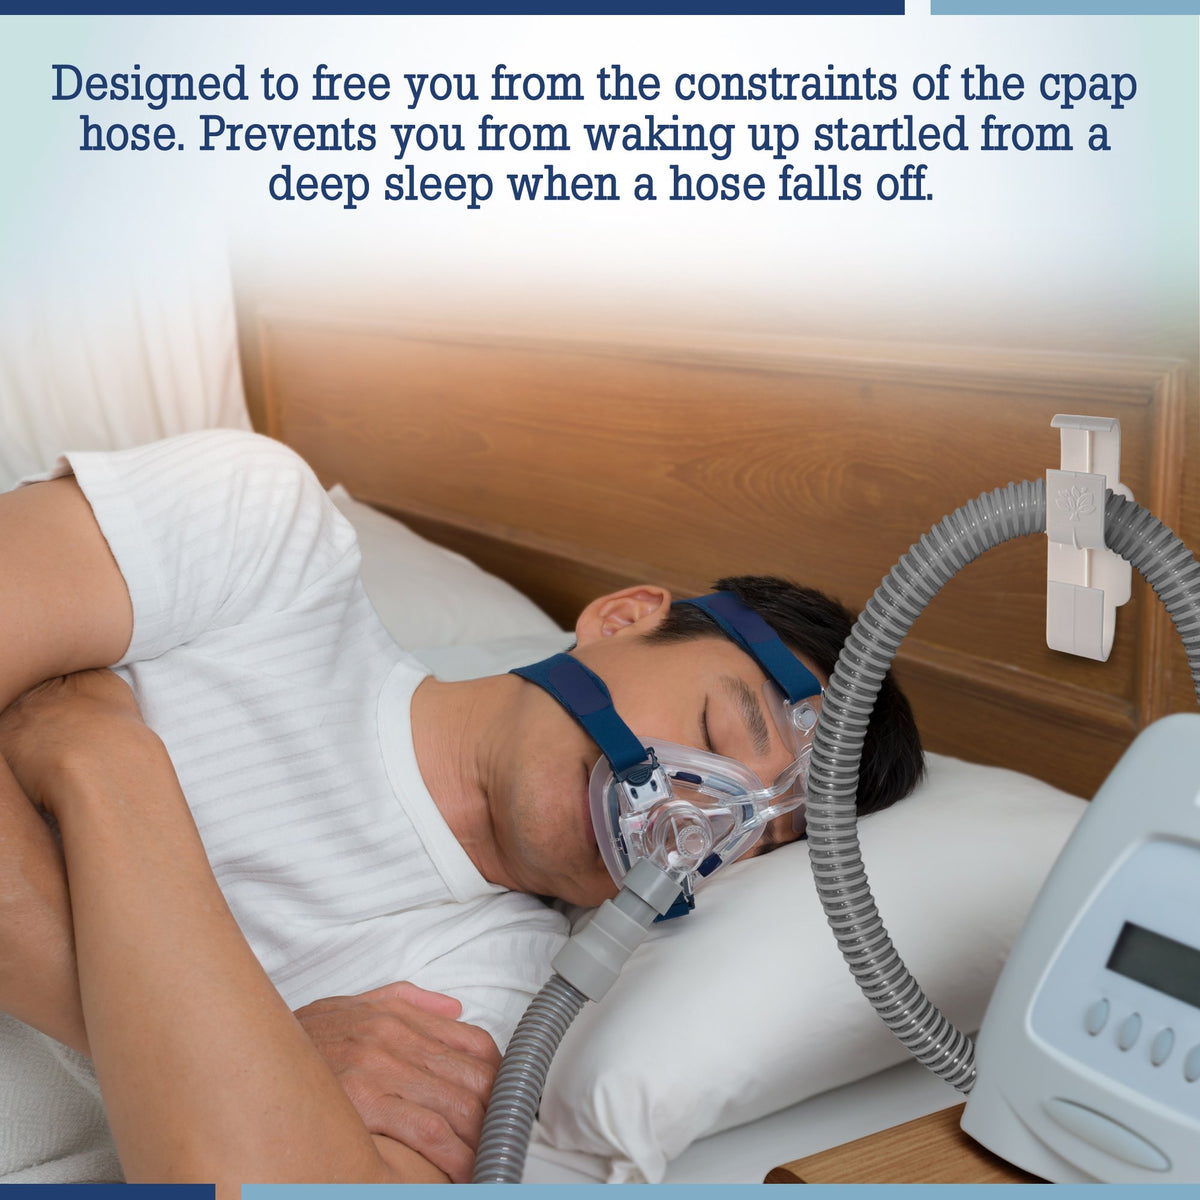 CPAP Hose Holder Mask Holder - Easy to Install Plastic CPAP Accessories for CPAP Machines - Easy to Use CPAP Supplies - Double Hook CPAP Tube Holder